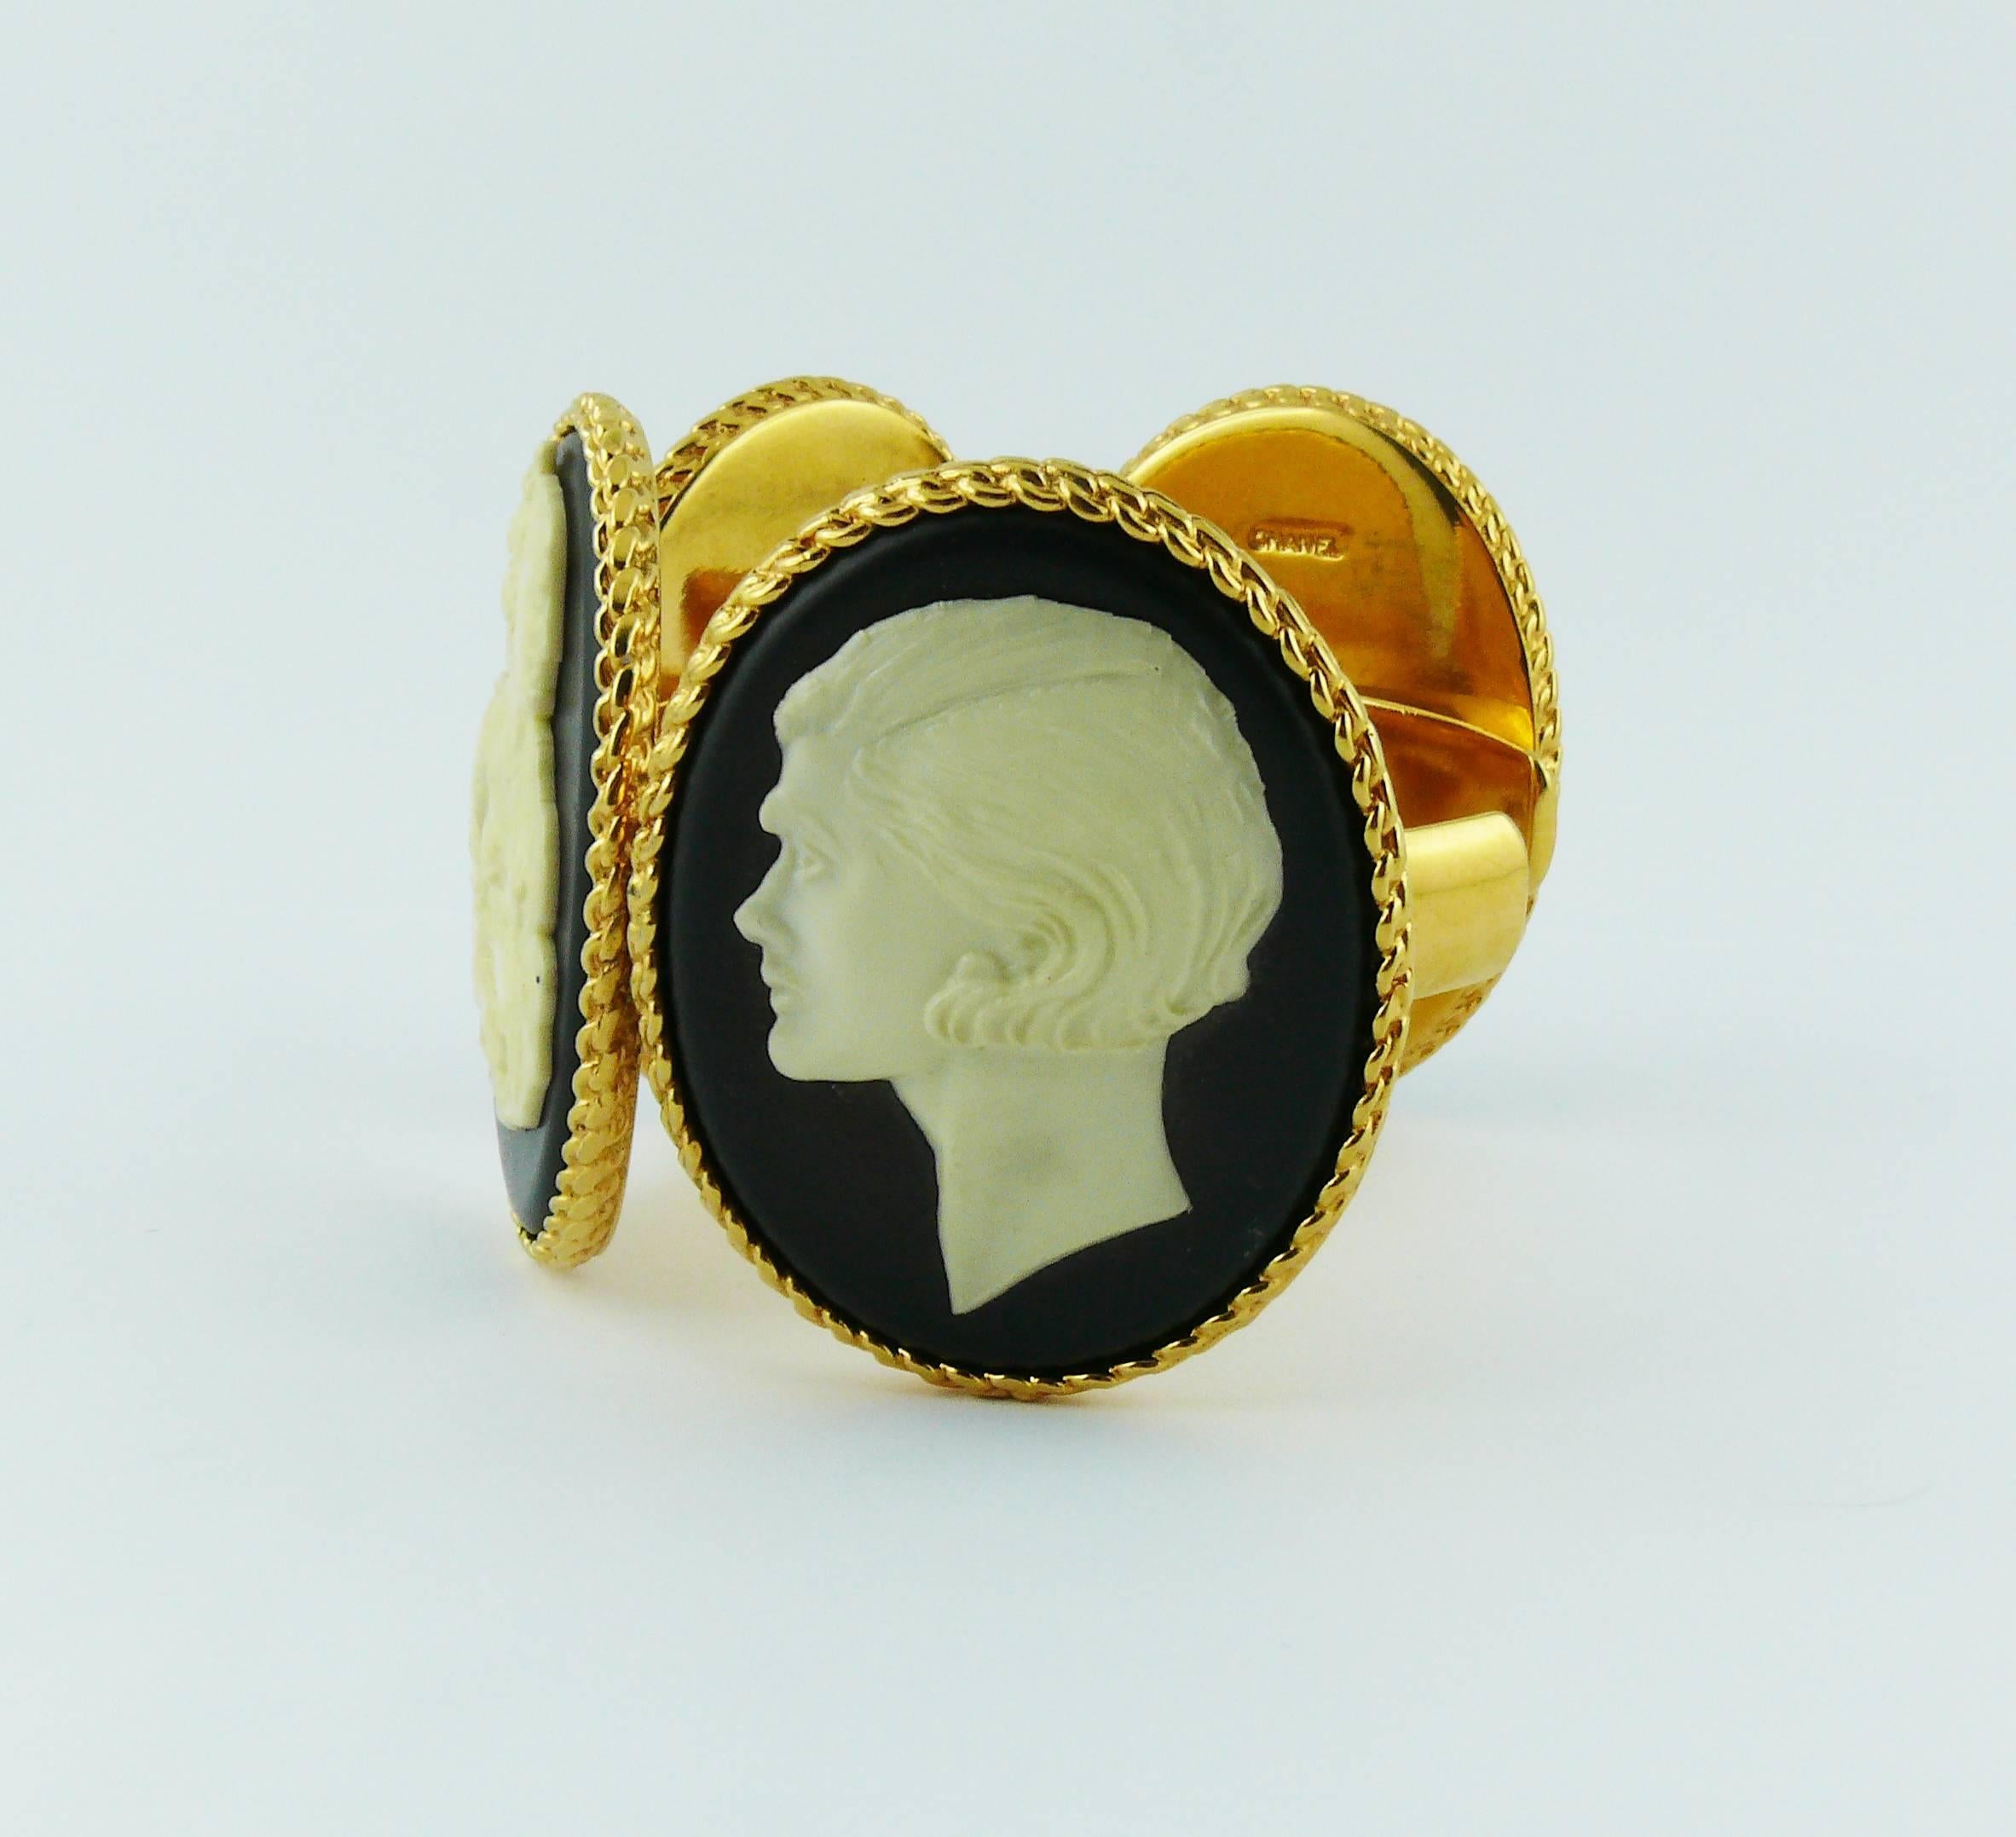 Women's Chanel Vintage Uber Rare Cameo Cuff Bracelet Collector